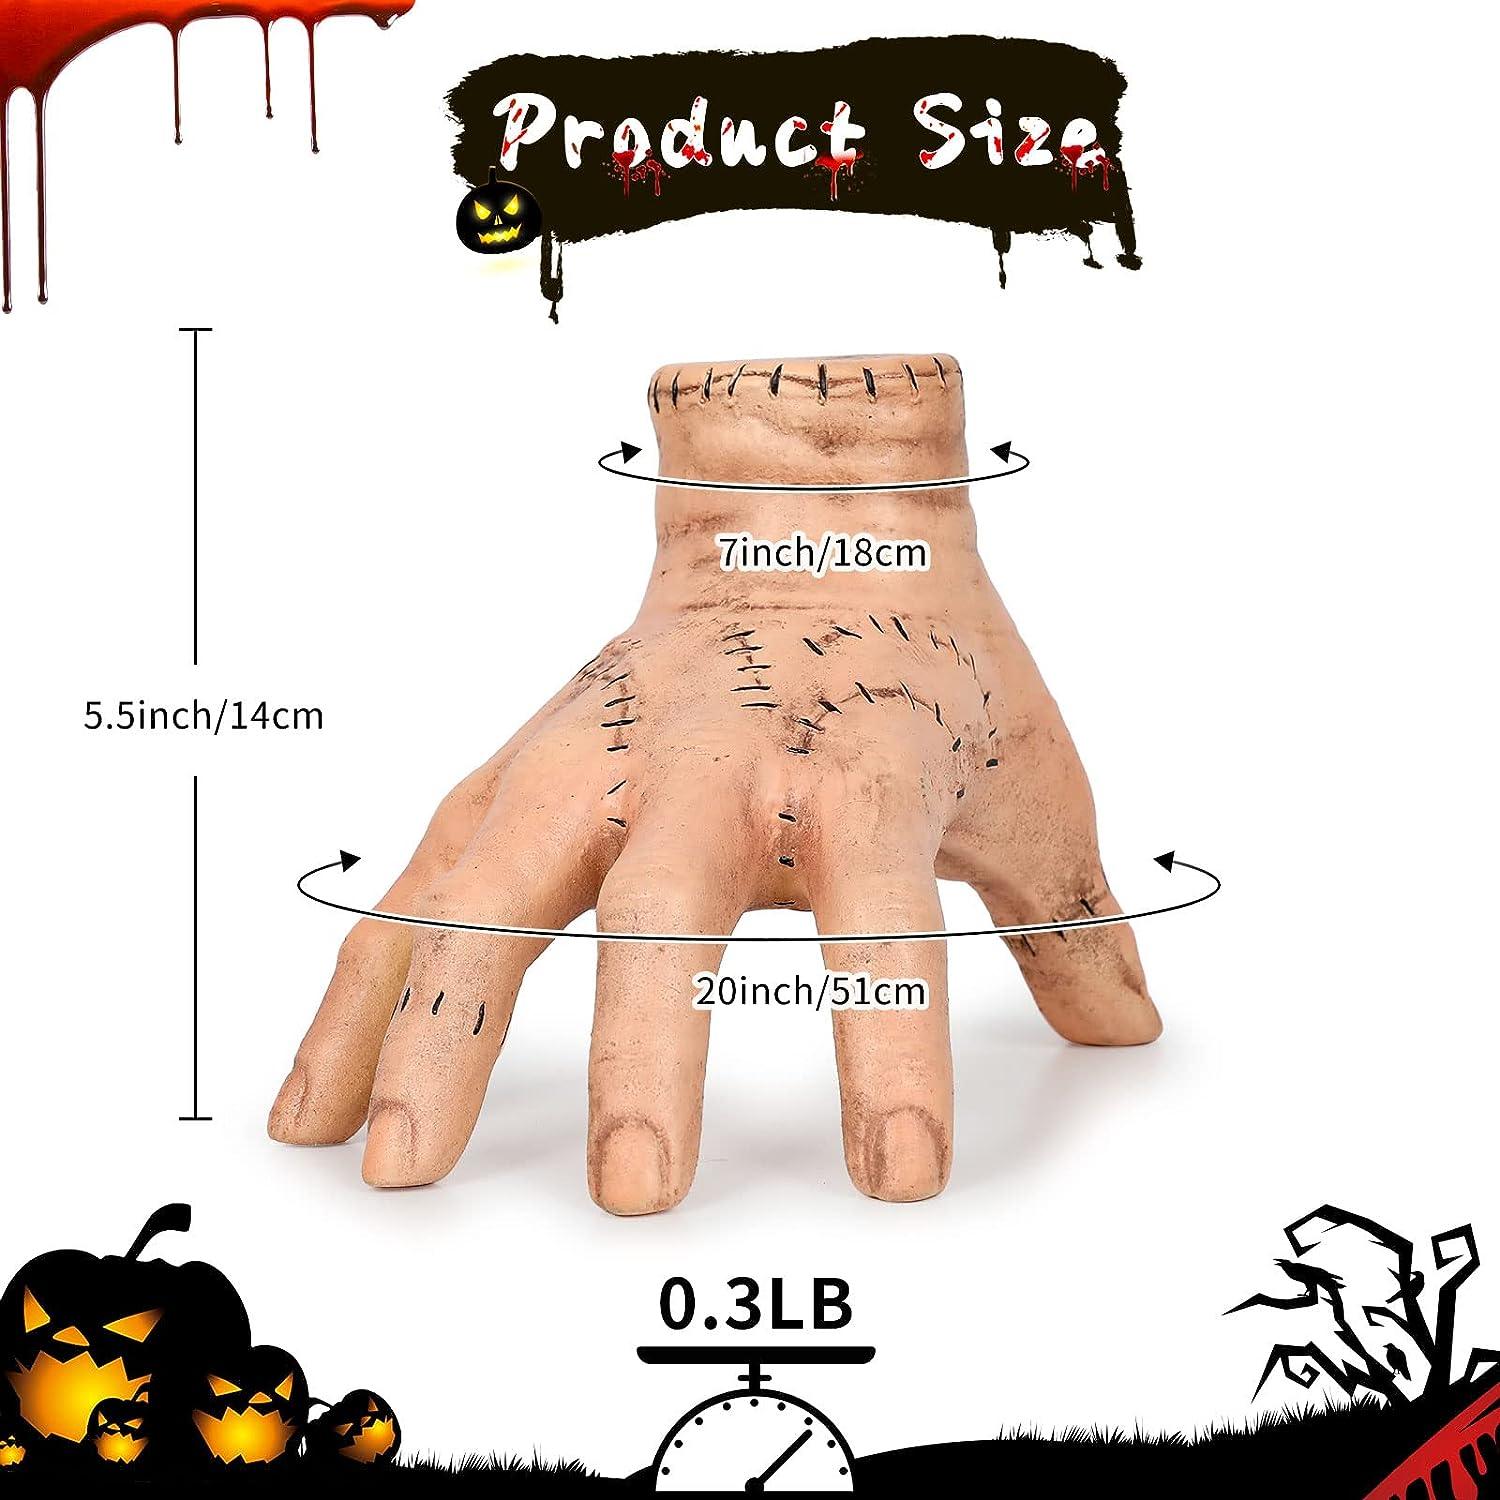 Wednesday Addams Family Thing Hand Scary Realistic Fake Hand Gothic Prop Spooky - VIRTUAL MUEBLES